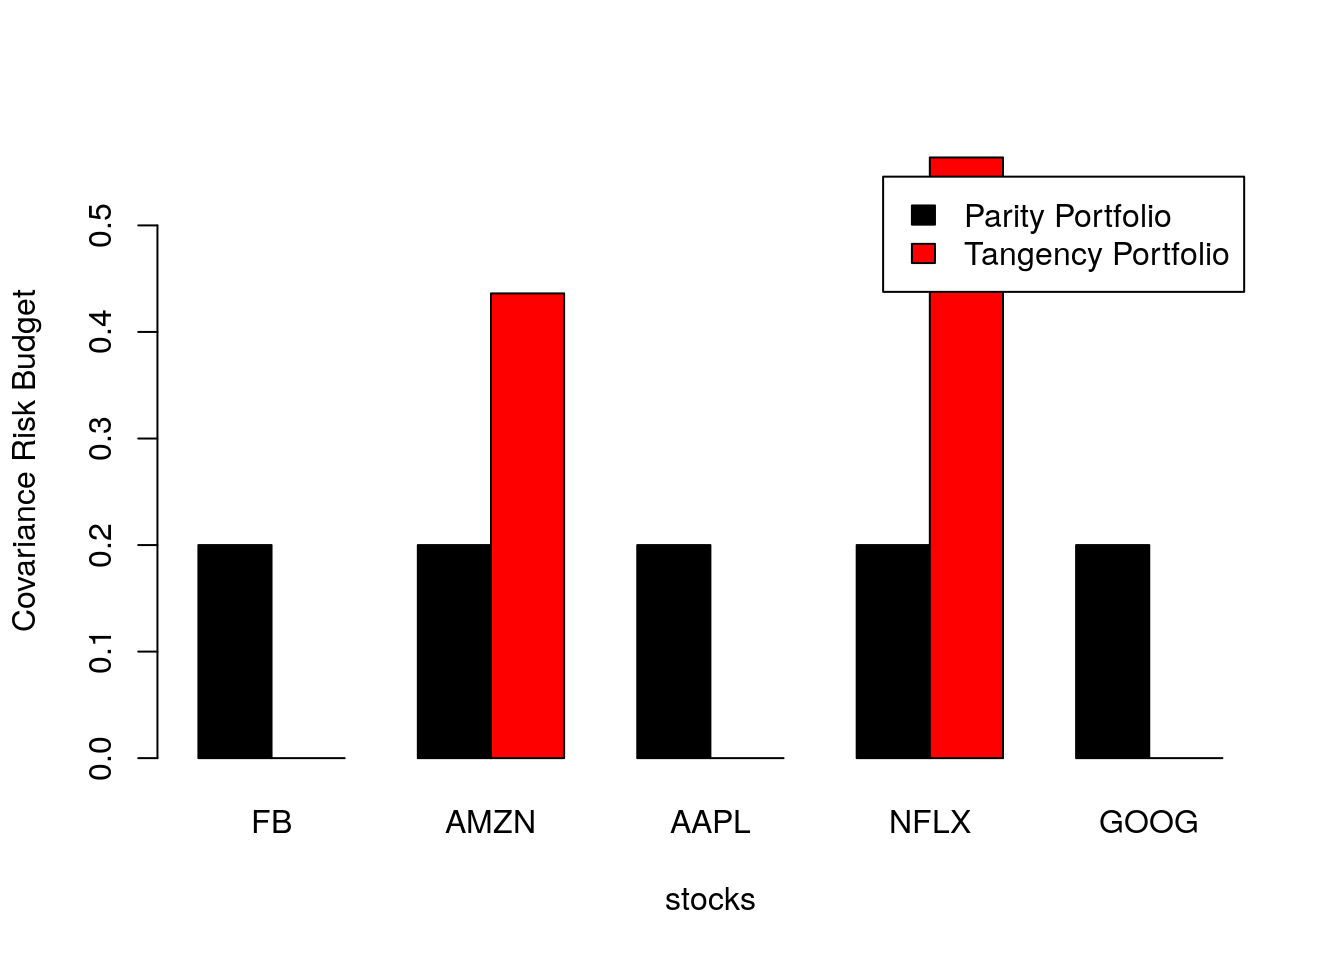 Portfolio covariance risk budget for parity and tangency FAANG portfolios considering returns from 2018.